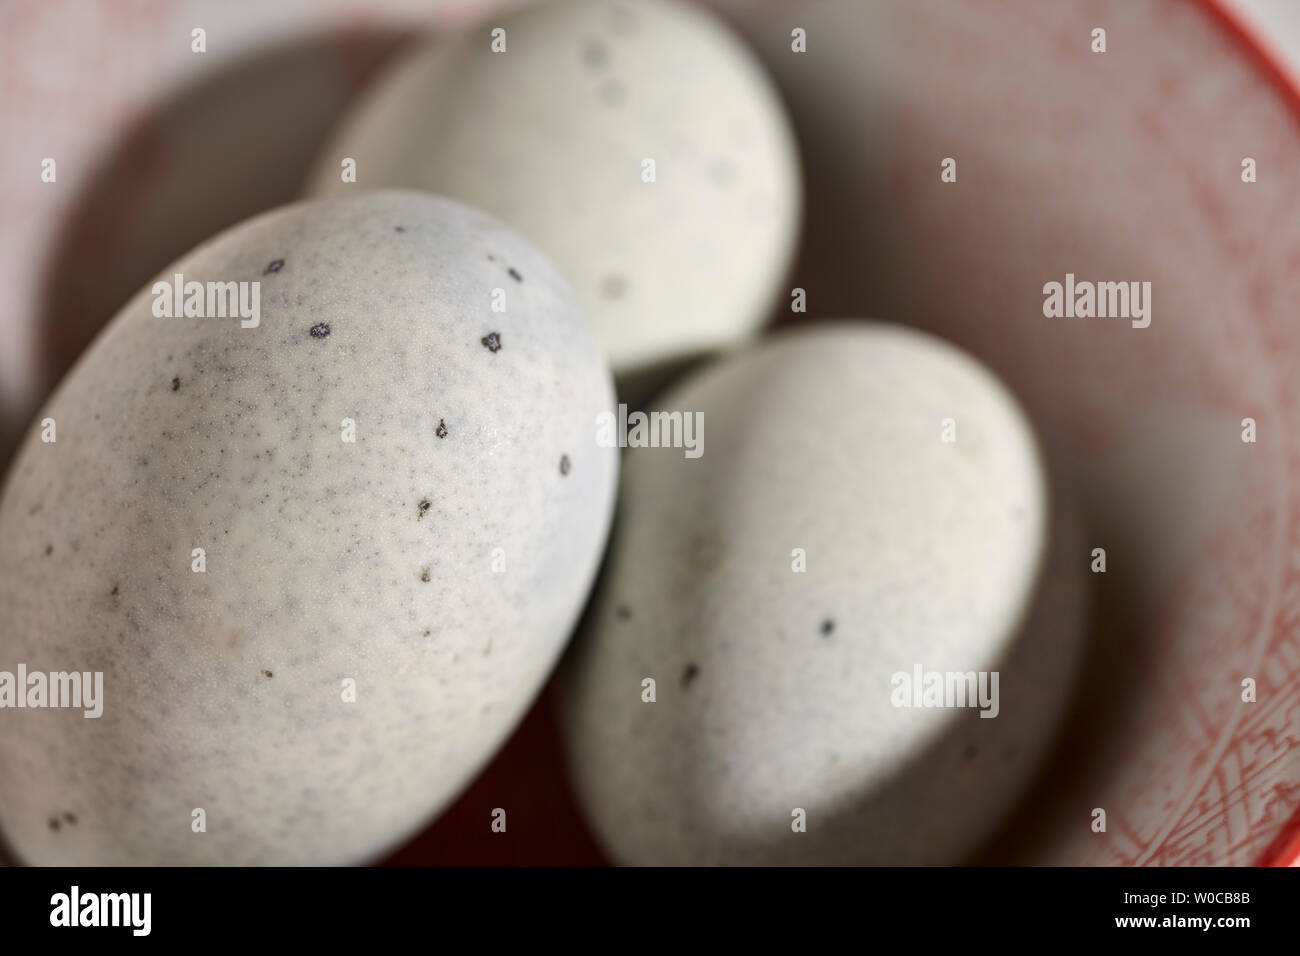 Two unpeeled preserved duck eggs, sometimes called century eggs, thousand year old eggs, or melinial eggs. Stock Photo